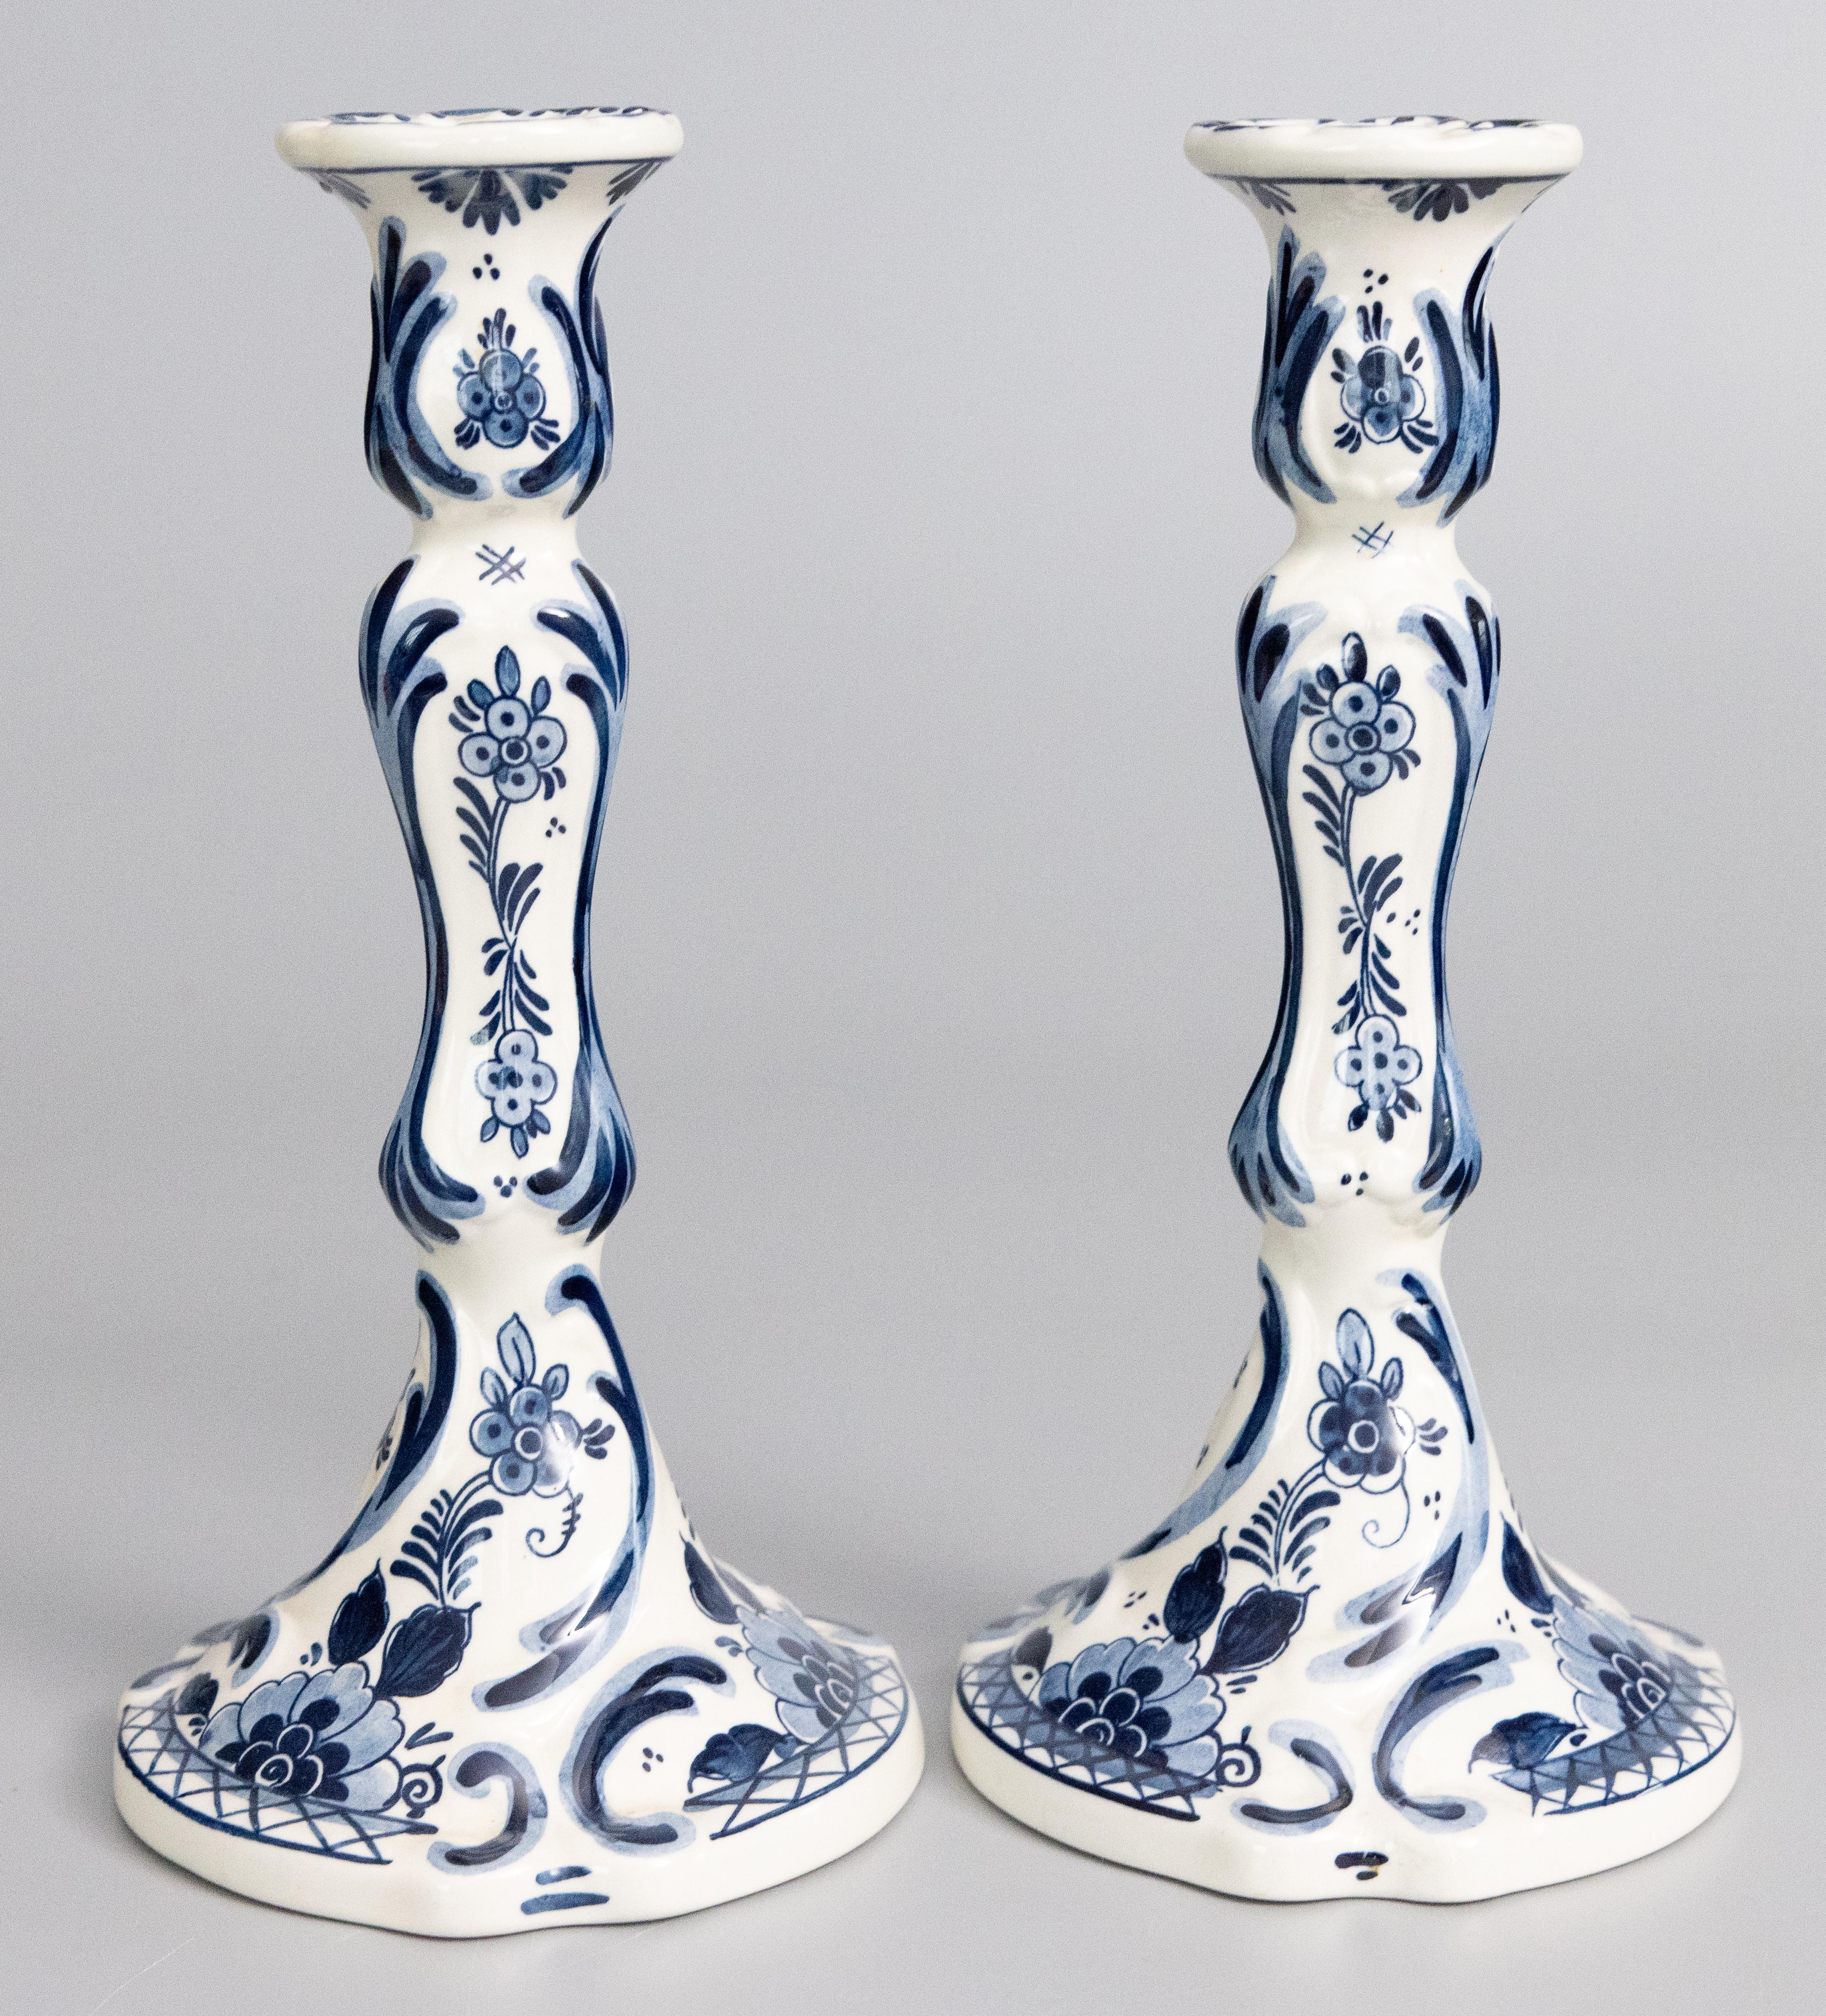 Hand-Painted Pair of Tall Vintage Dutch Delft Faience Floral Candlesticks